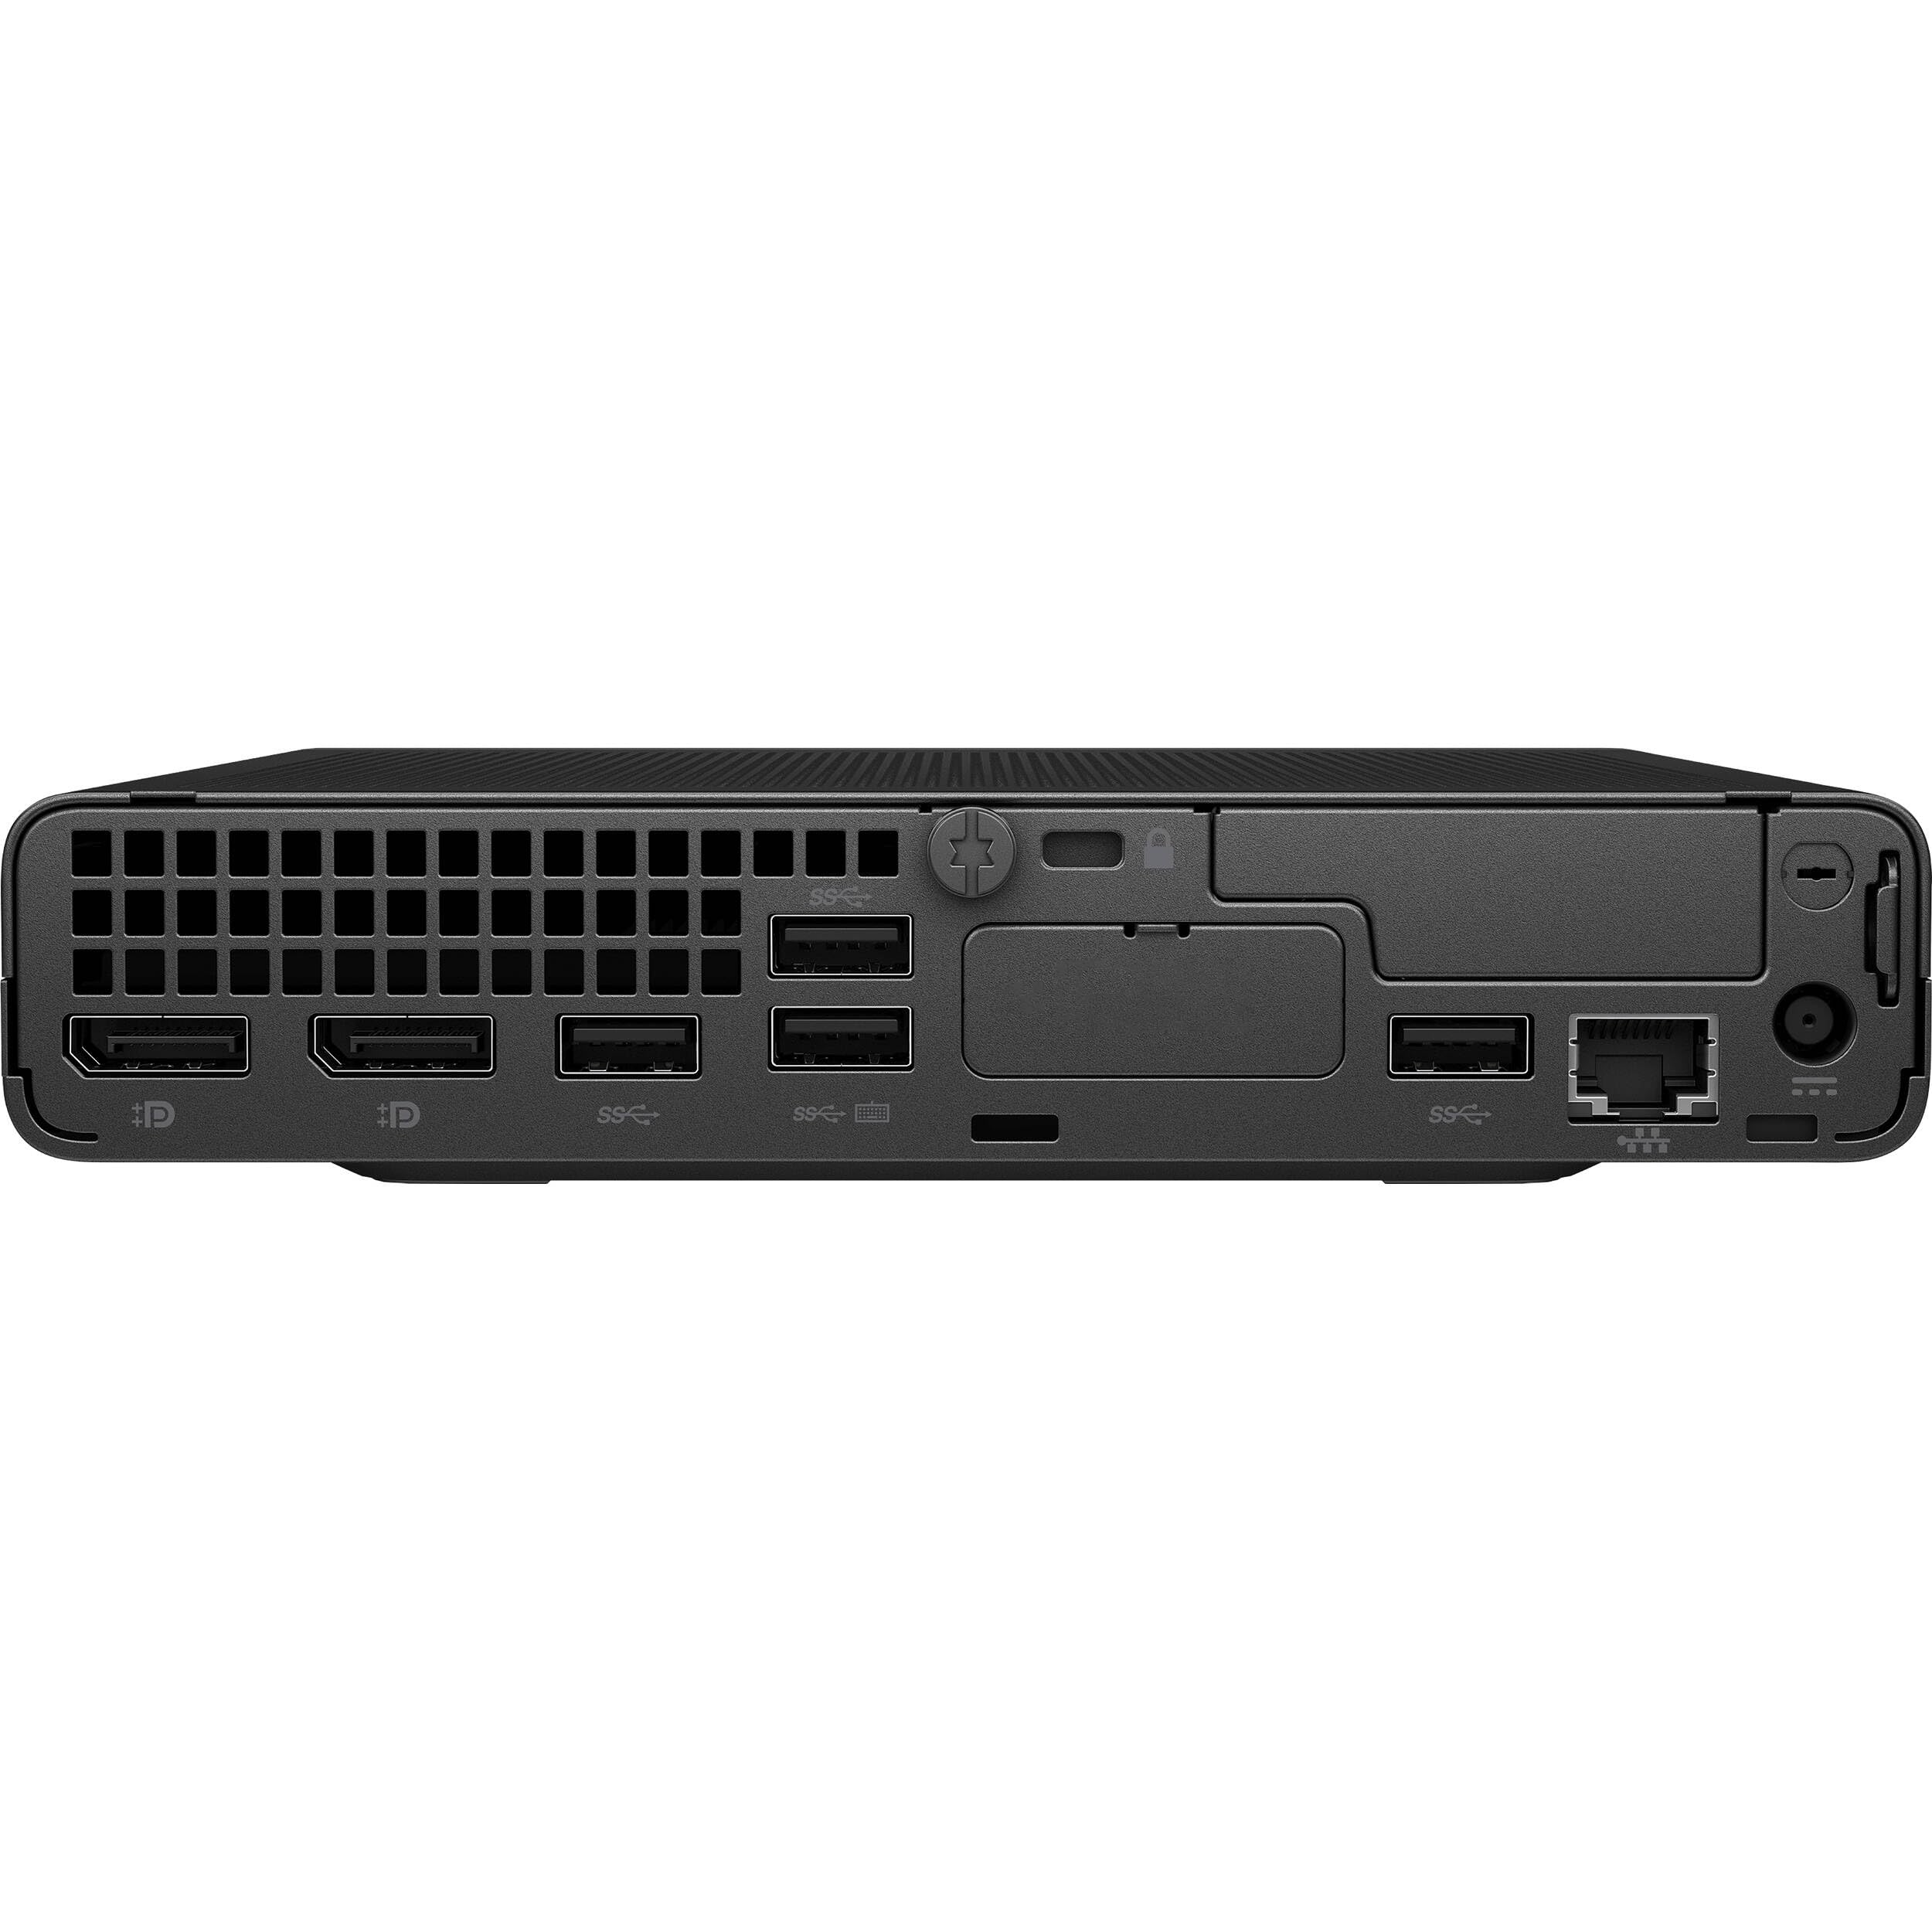 HP ProDesk 600 G6 Mini Business Desktop Computer, Intel Hexa-Core i5-10500T (Beat i7-8700T), 8GB DDR4 RAM, 256GB PCIe SSD, WiFi 6, Bluetooth 5.2, Keyboard and Mouse, Windows 11 Pro, BROAG HDMI Cable